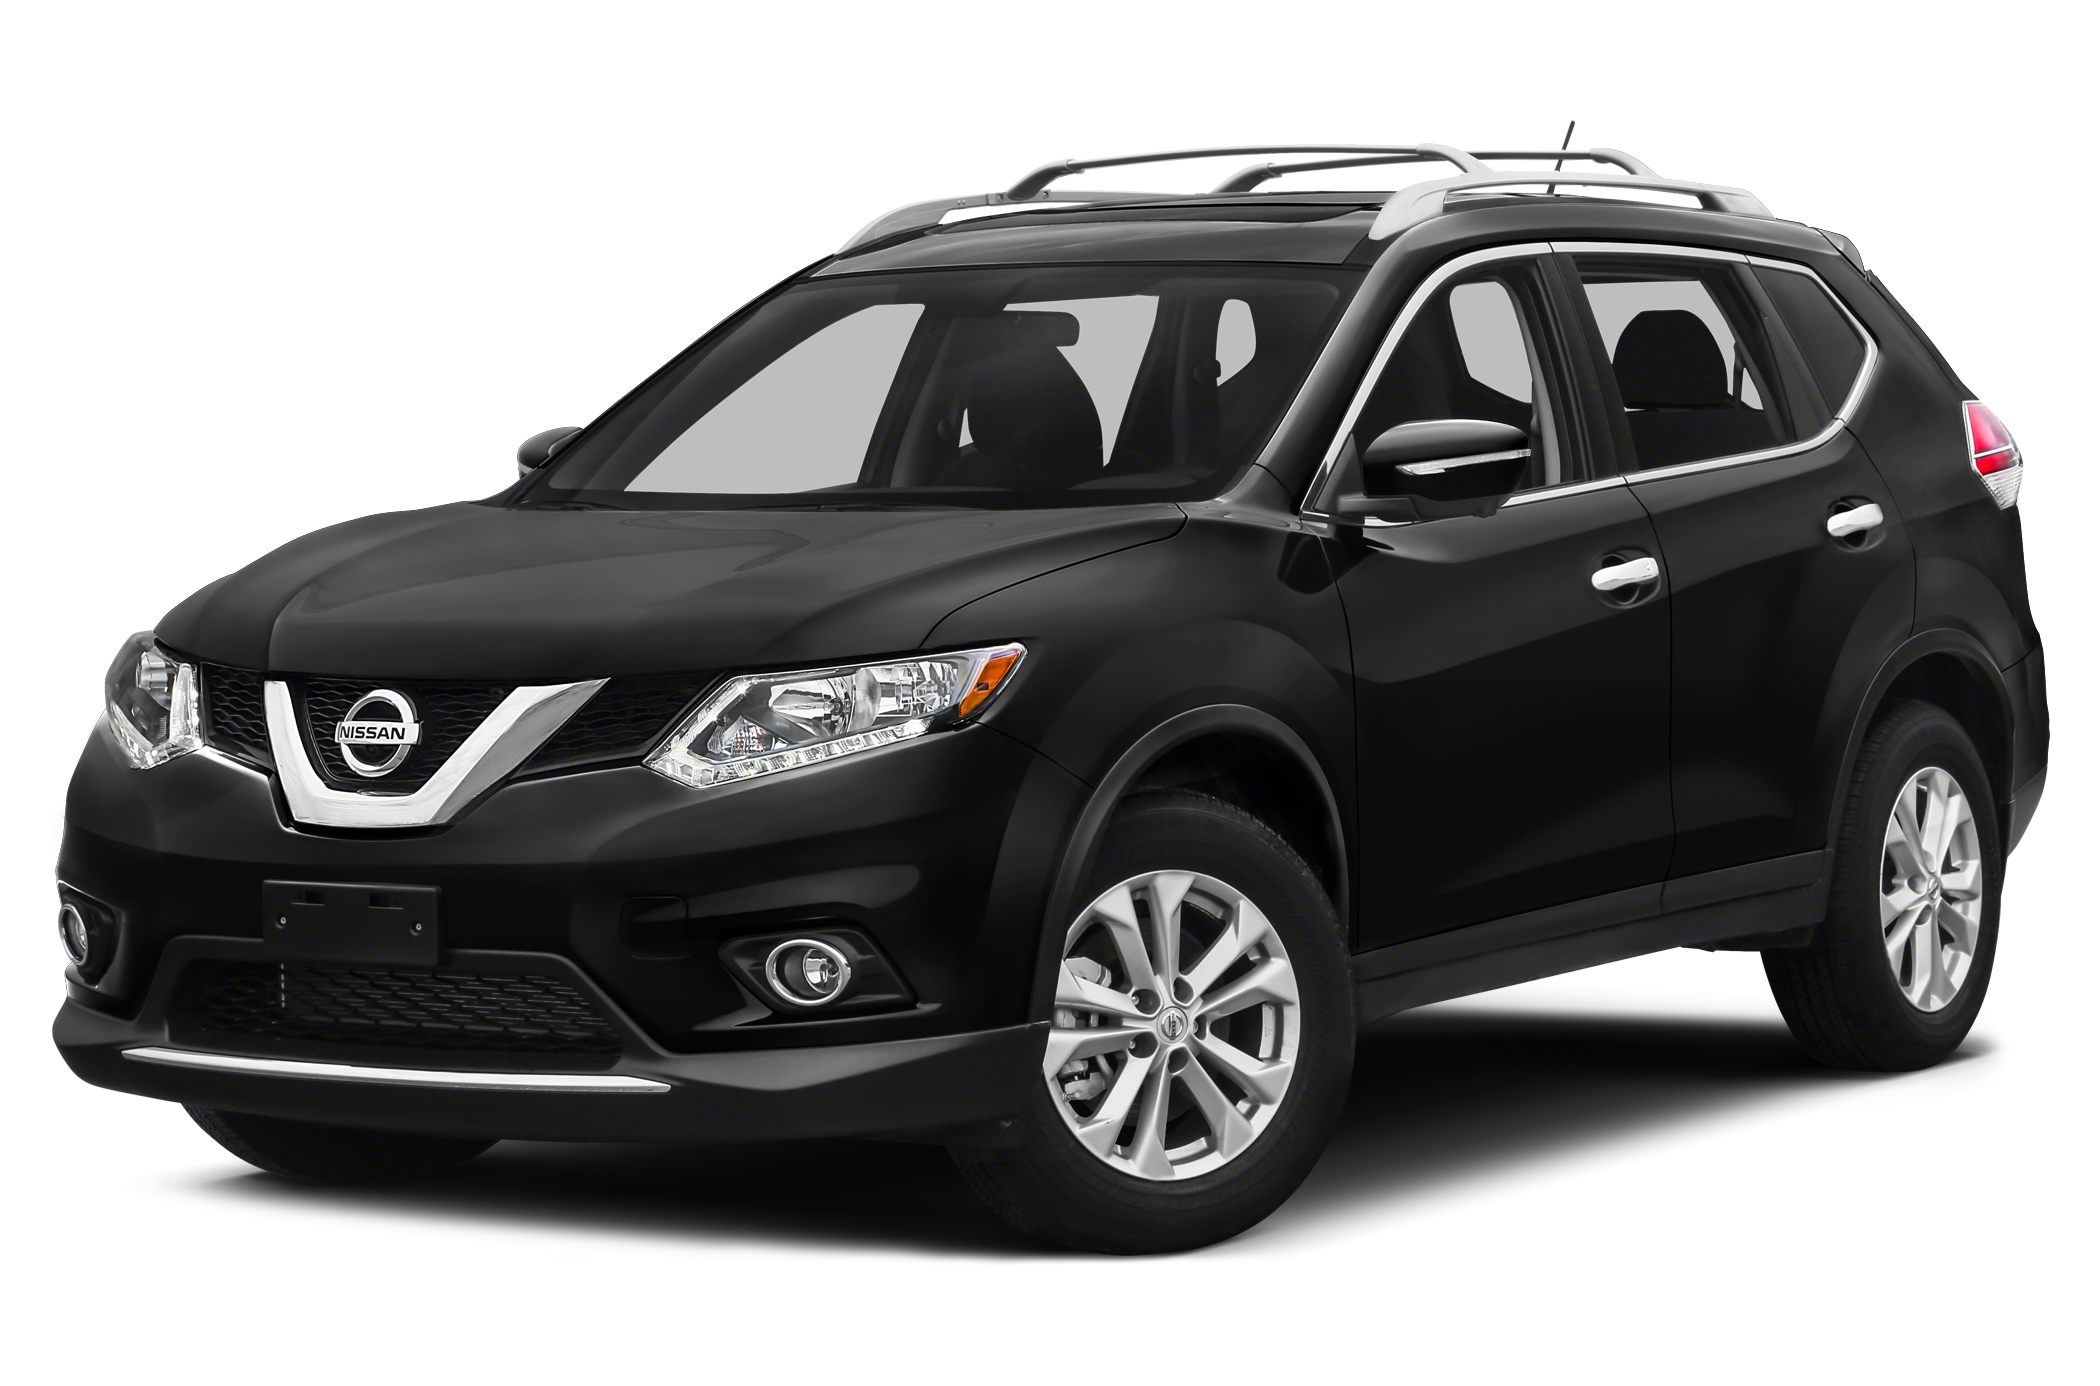 Image result for pics of 2016 nissan rogue